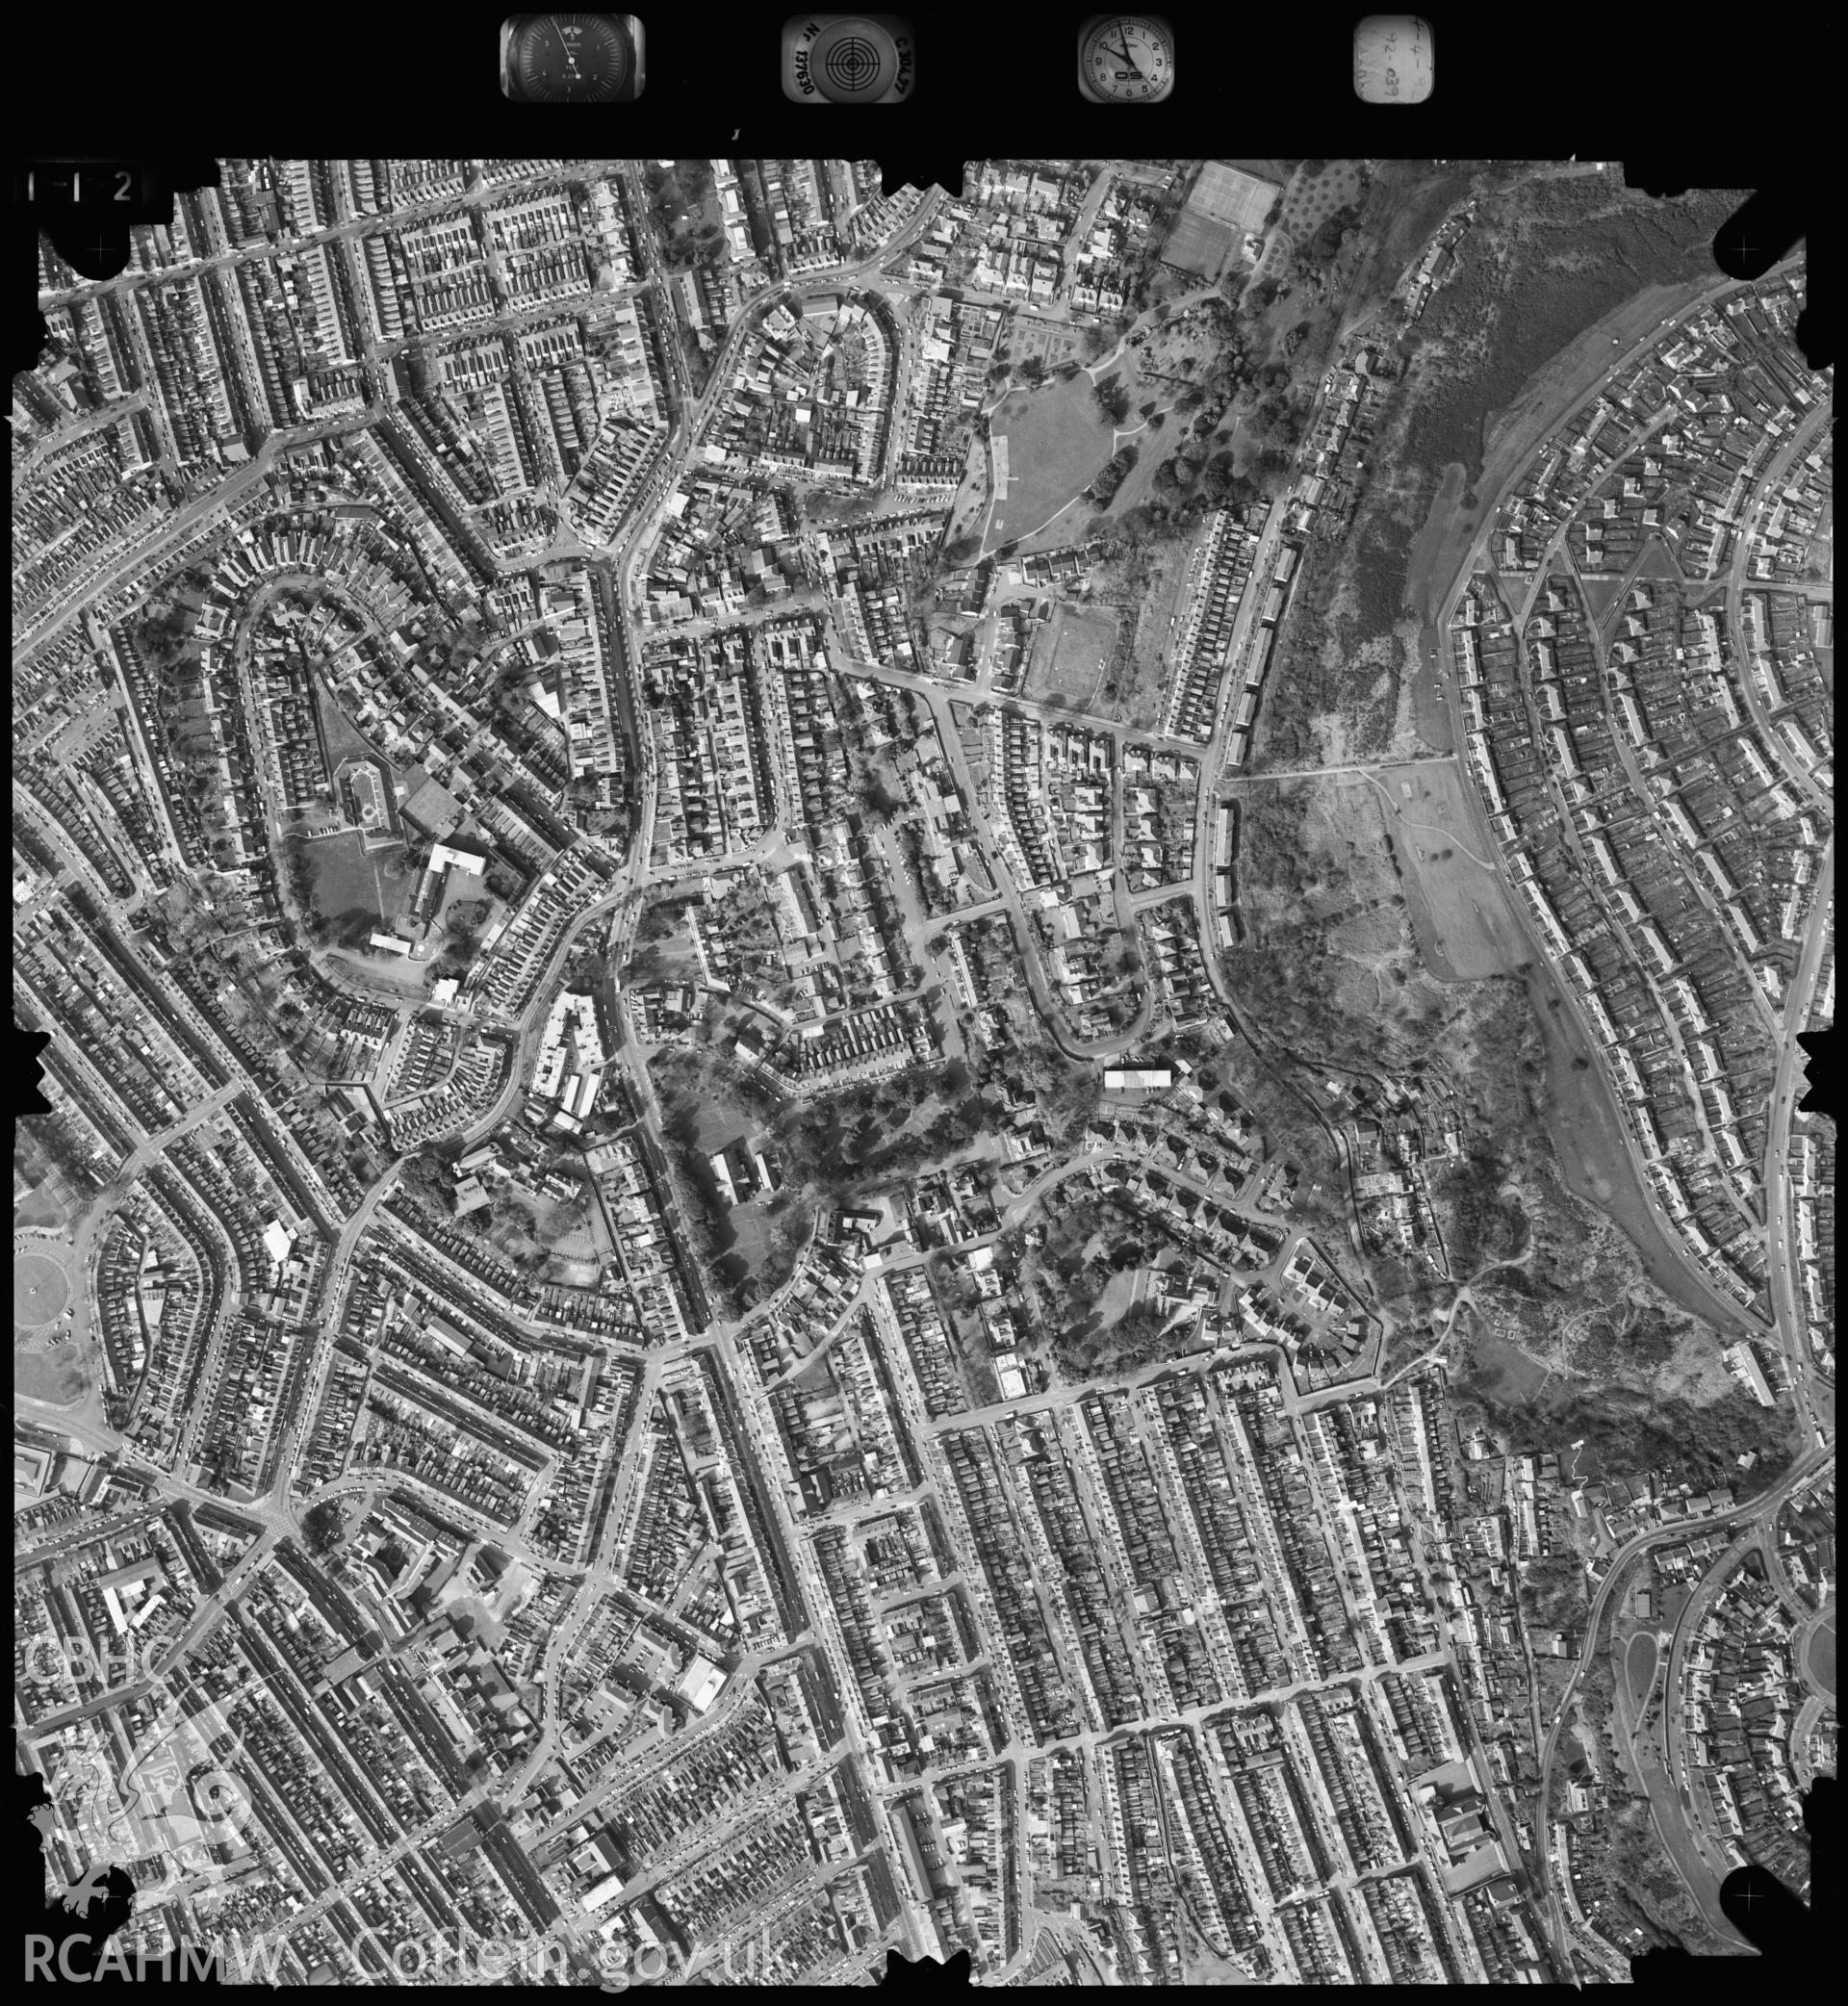 Digitized copy of an aerial photograph showing theSwansea area, taken by Ordnance Survey, 1993.